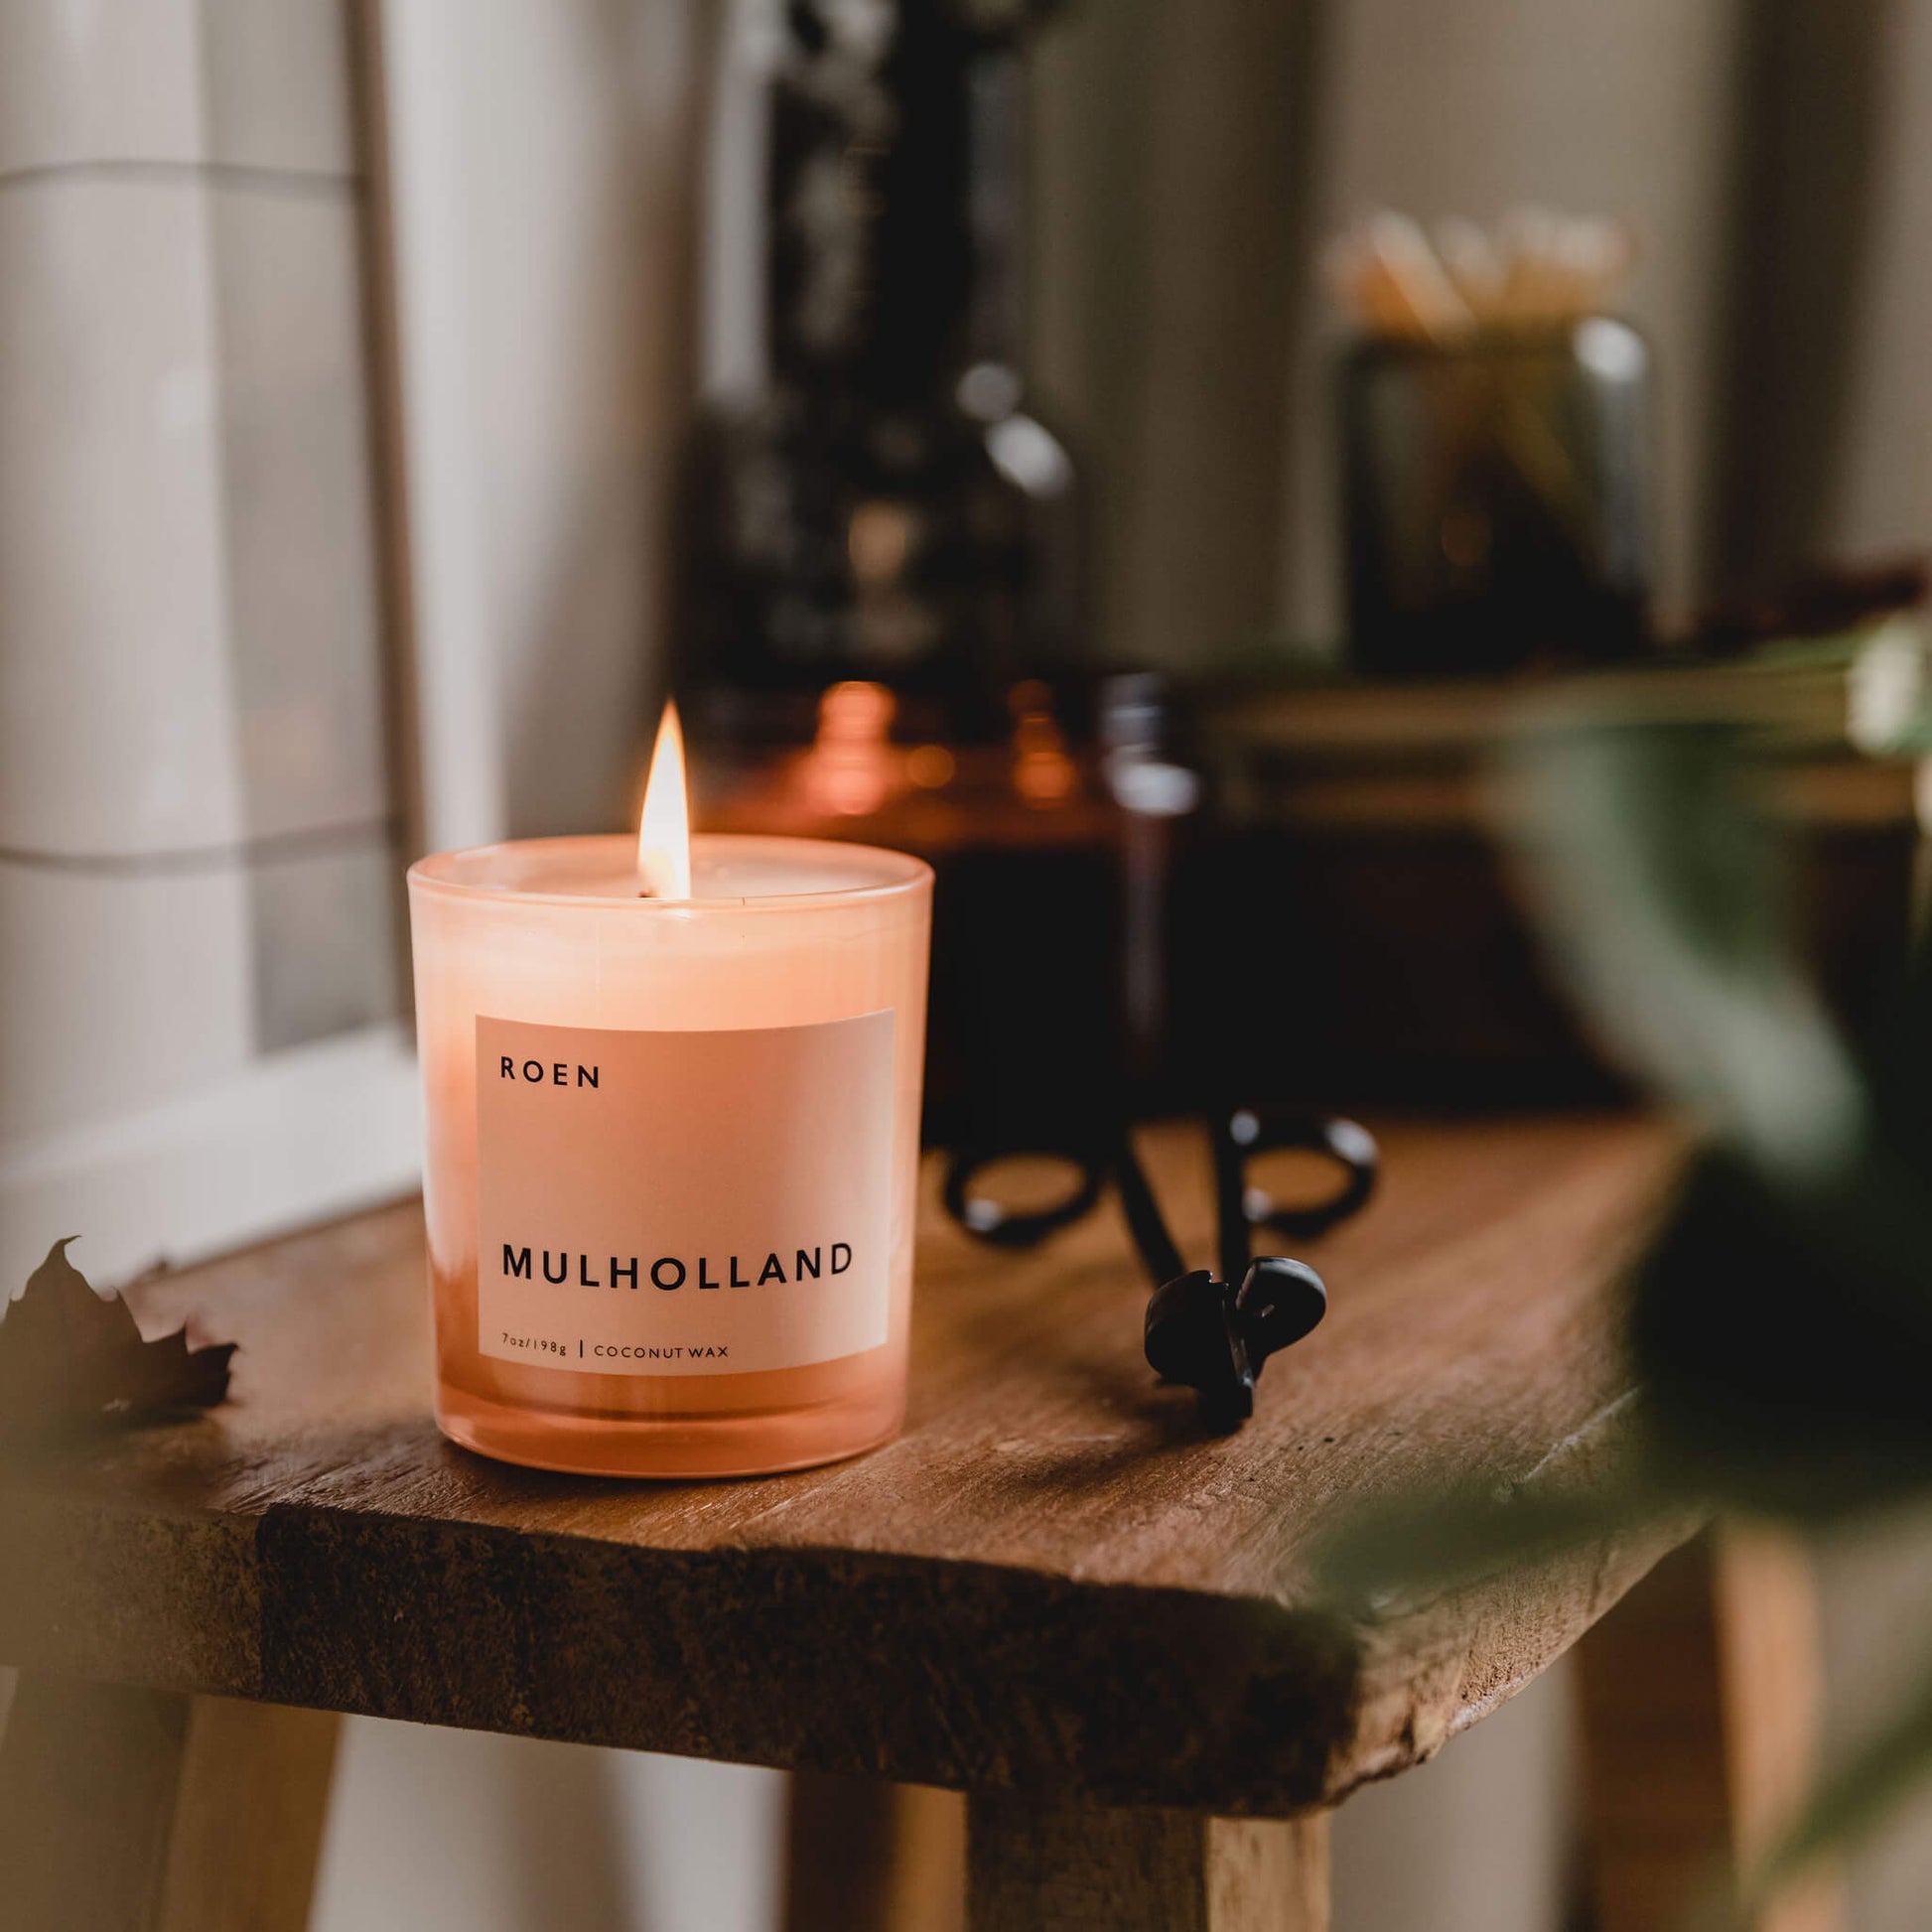 Mulholland Candle by R O E N